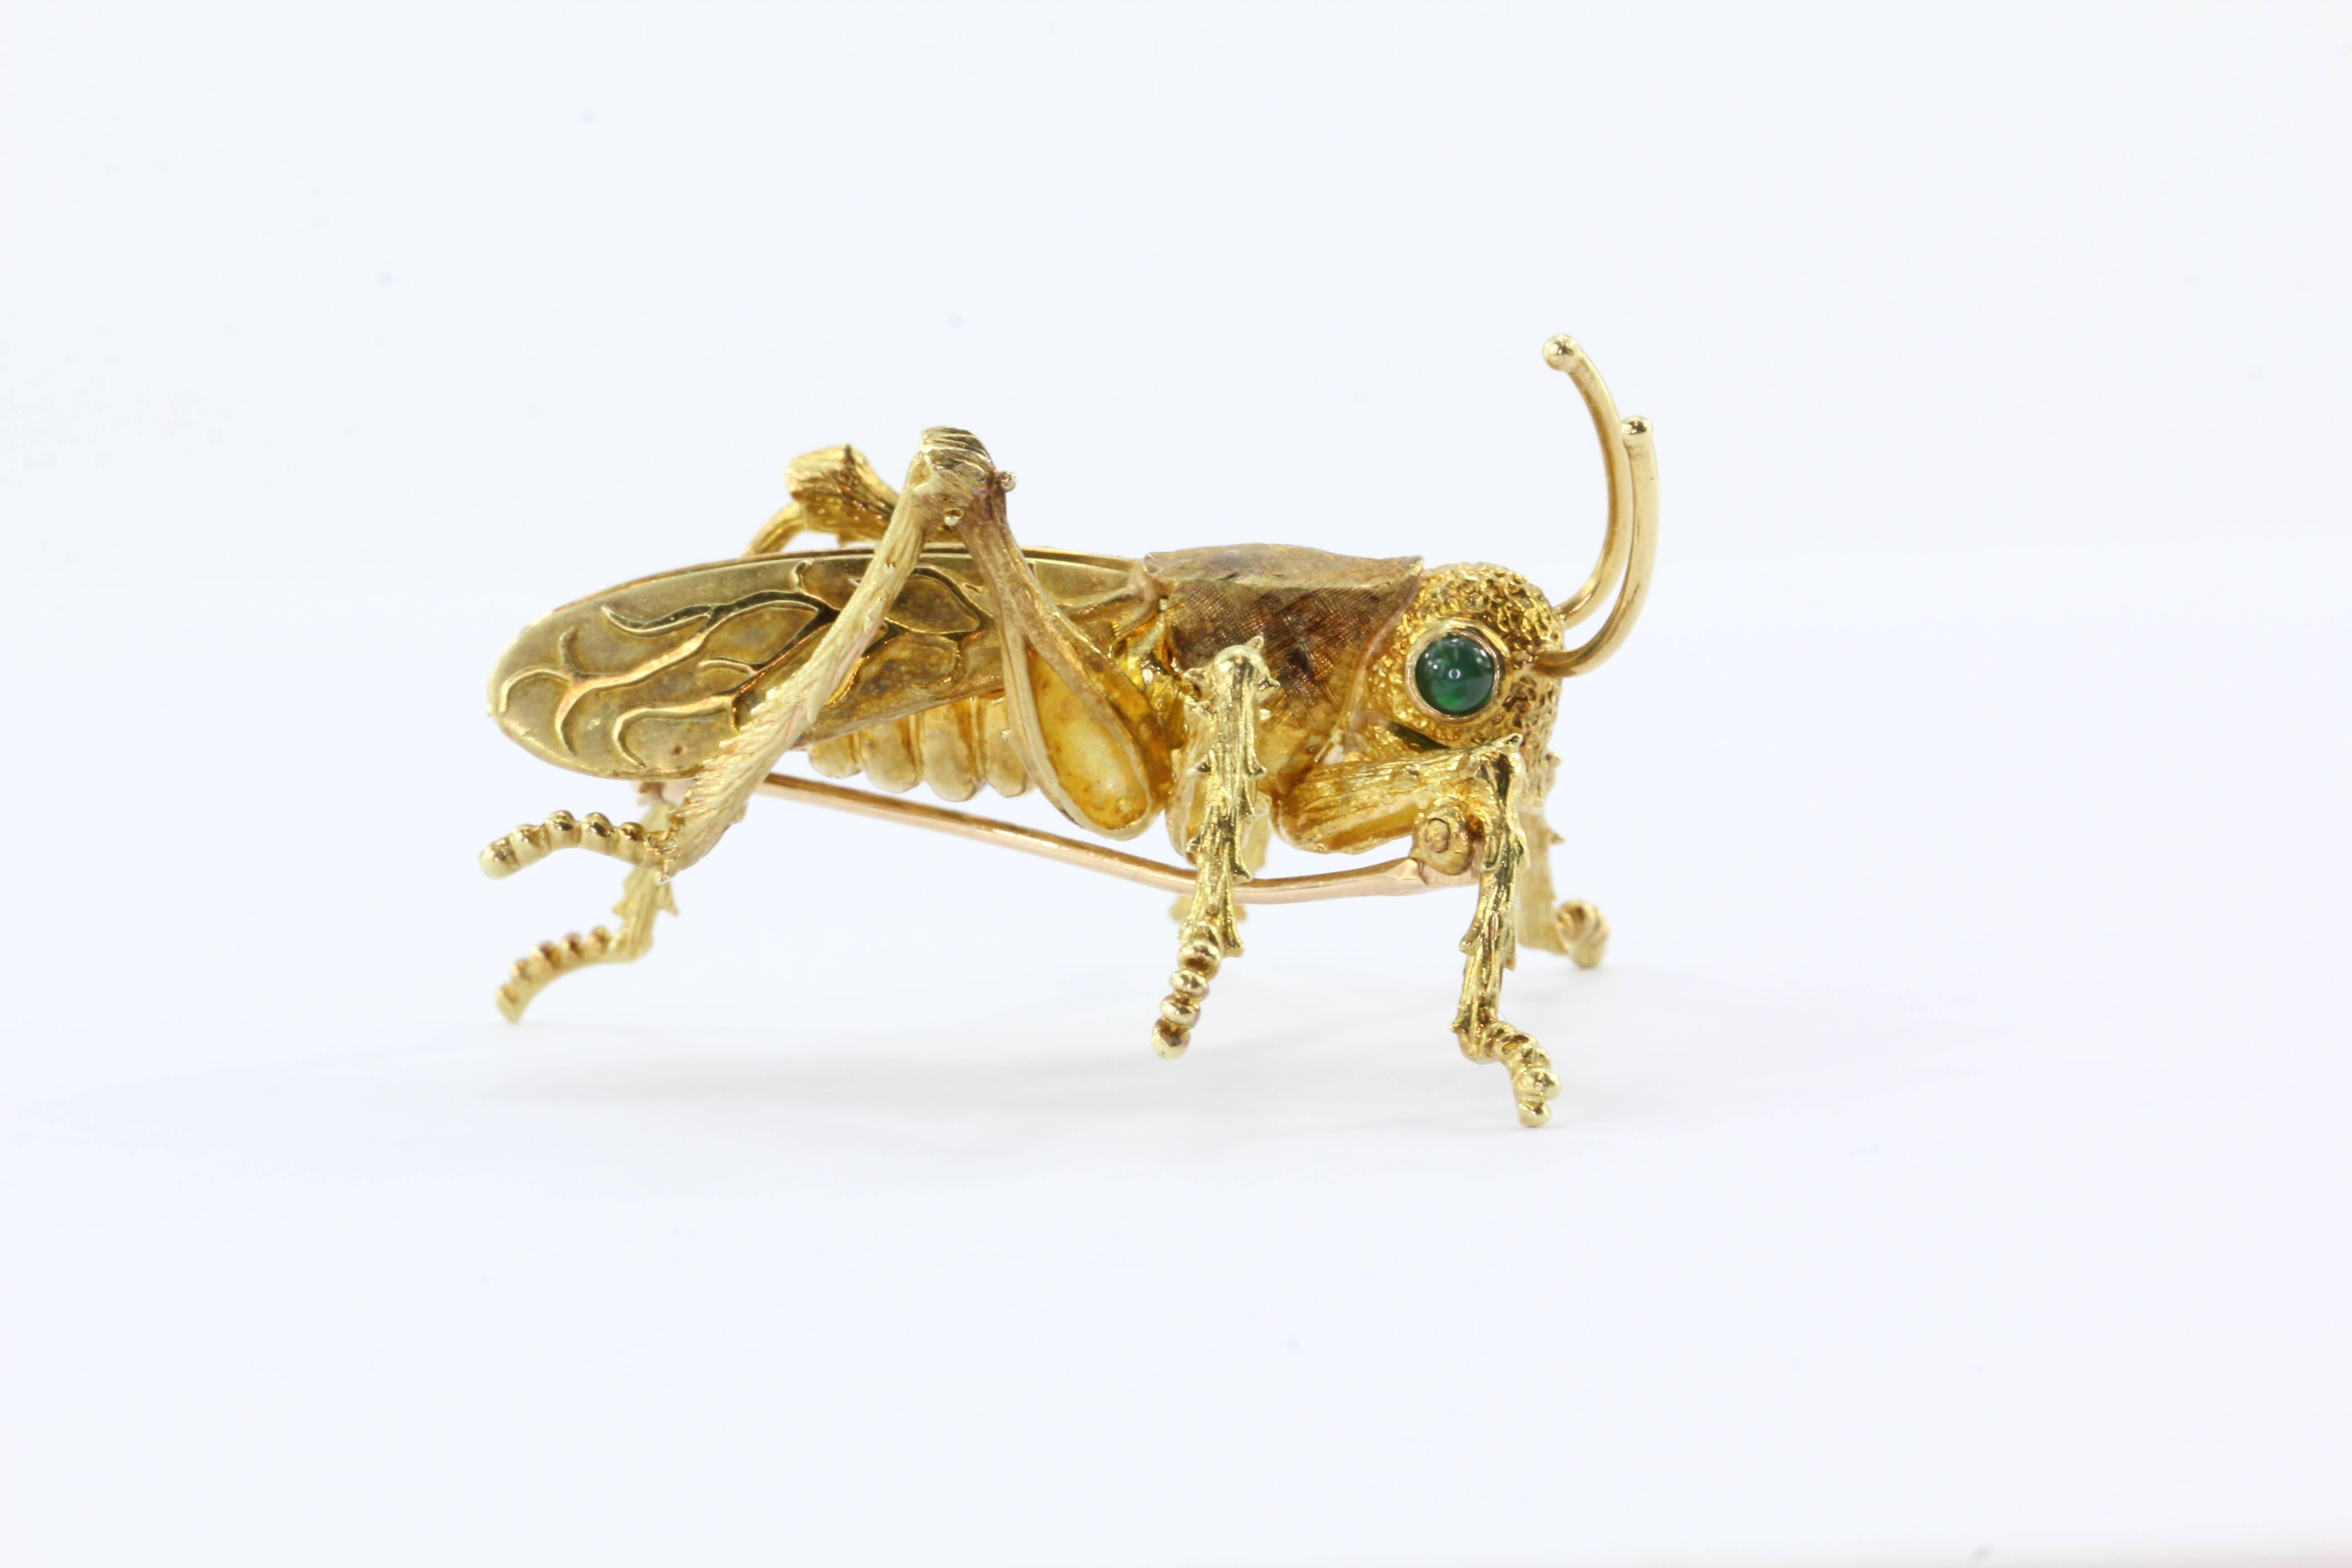 18K Yellow Gold Emerald Kurt Wayne Naturalistic Grasshopper Brooch Pin. The piece is in excellent estate condition and ready to wear. It is marked with the serial number 54377 on the bottom. The eyes are set with genuine emerald cabochons. The piece